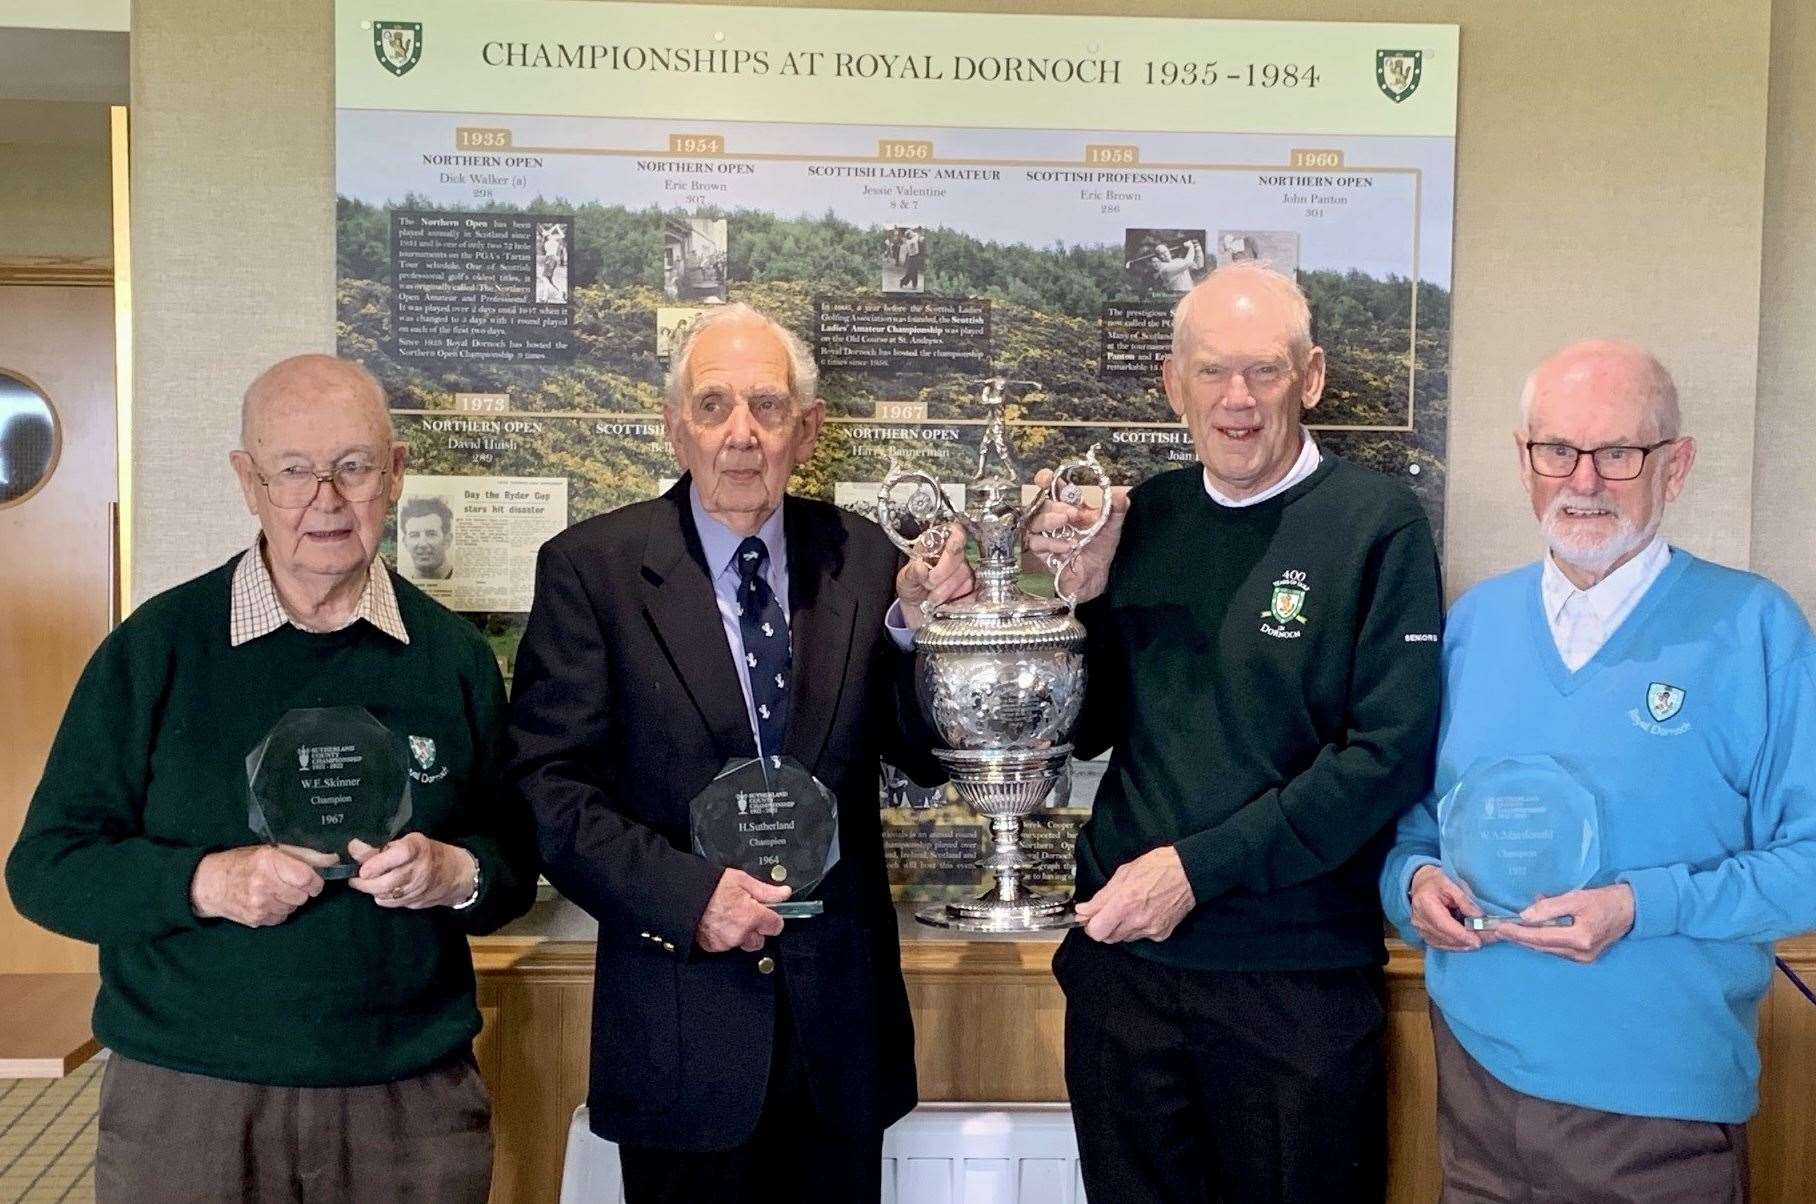 Sharing Sutherland County Cup memories, from left, Willie Skinner, Hamish Sutherland, Jim Miller and Sanders MacDonald.